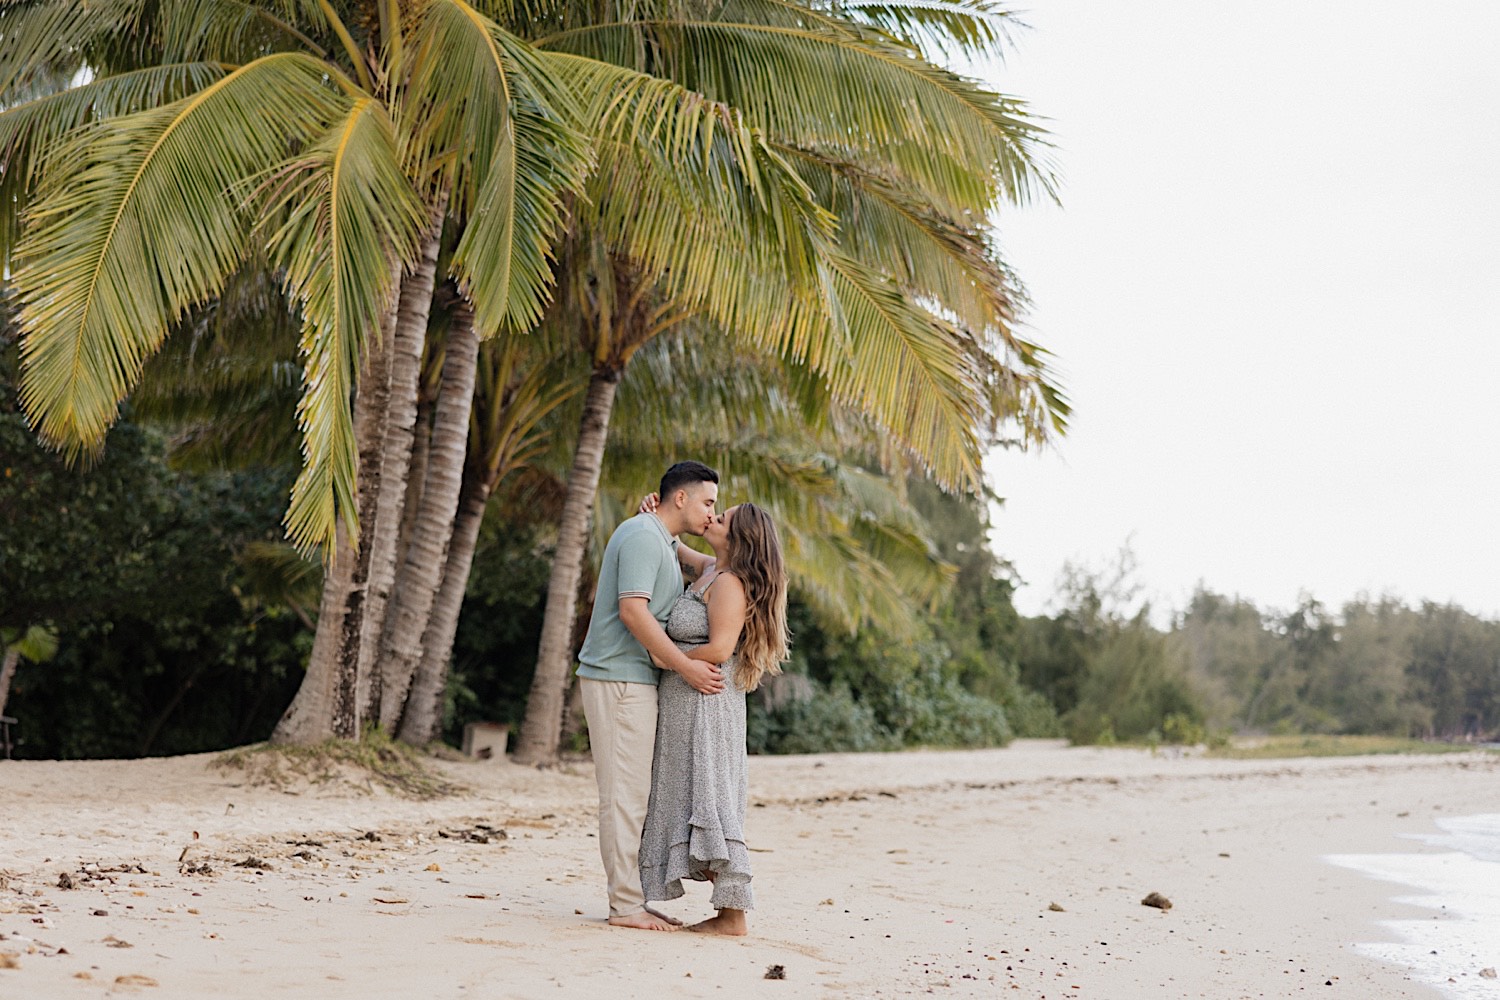 After their proposal at Secret Island on Oahu a man and woman kiss one another while standing under a palm tree on the beach